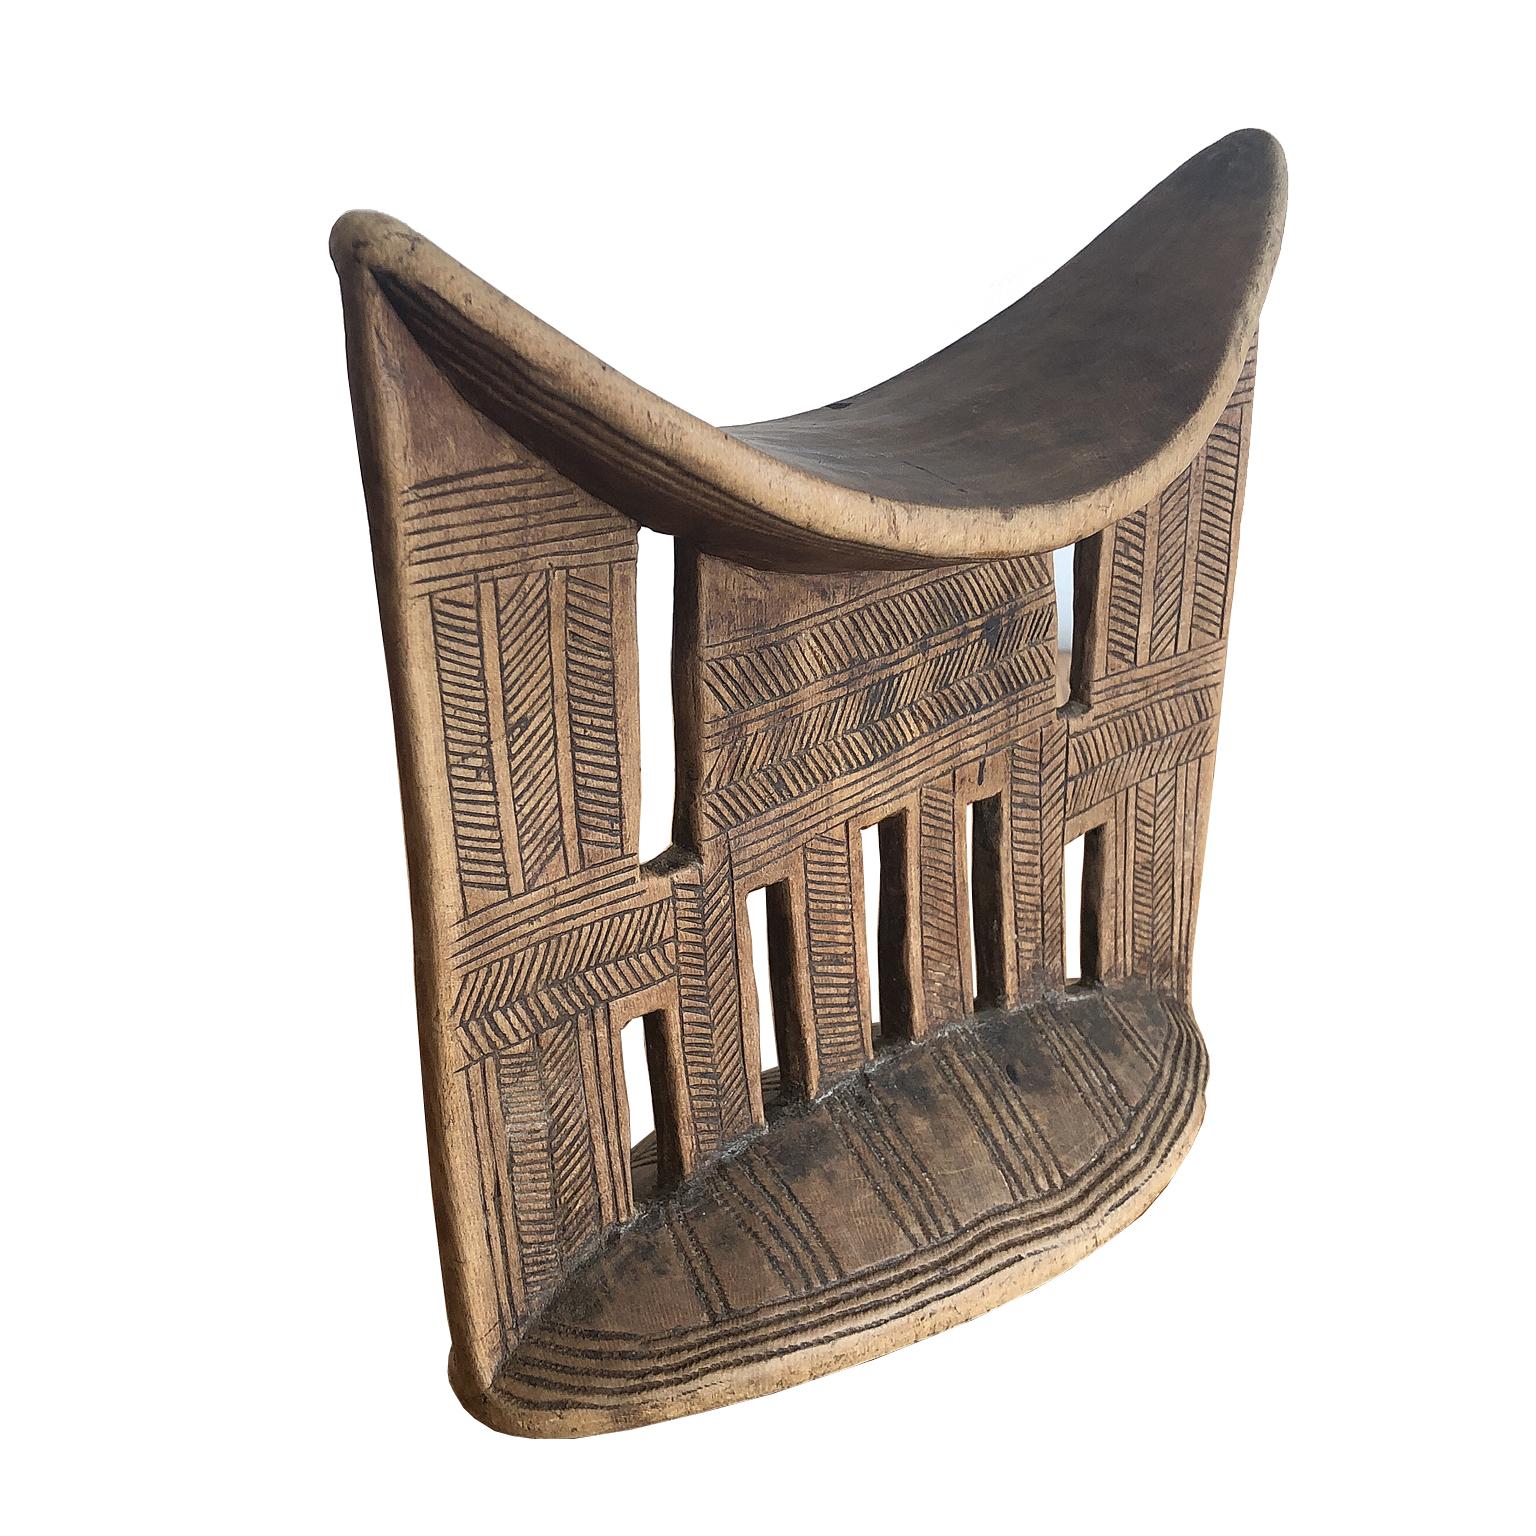 Ethiopian African Tribal Headrest in Carved Wood from the Sidama People of Ethiopia